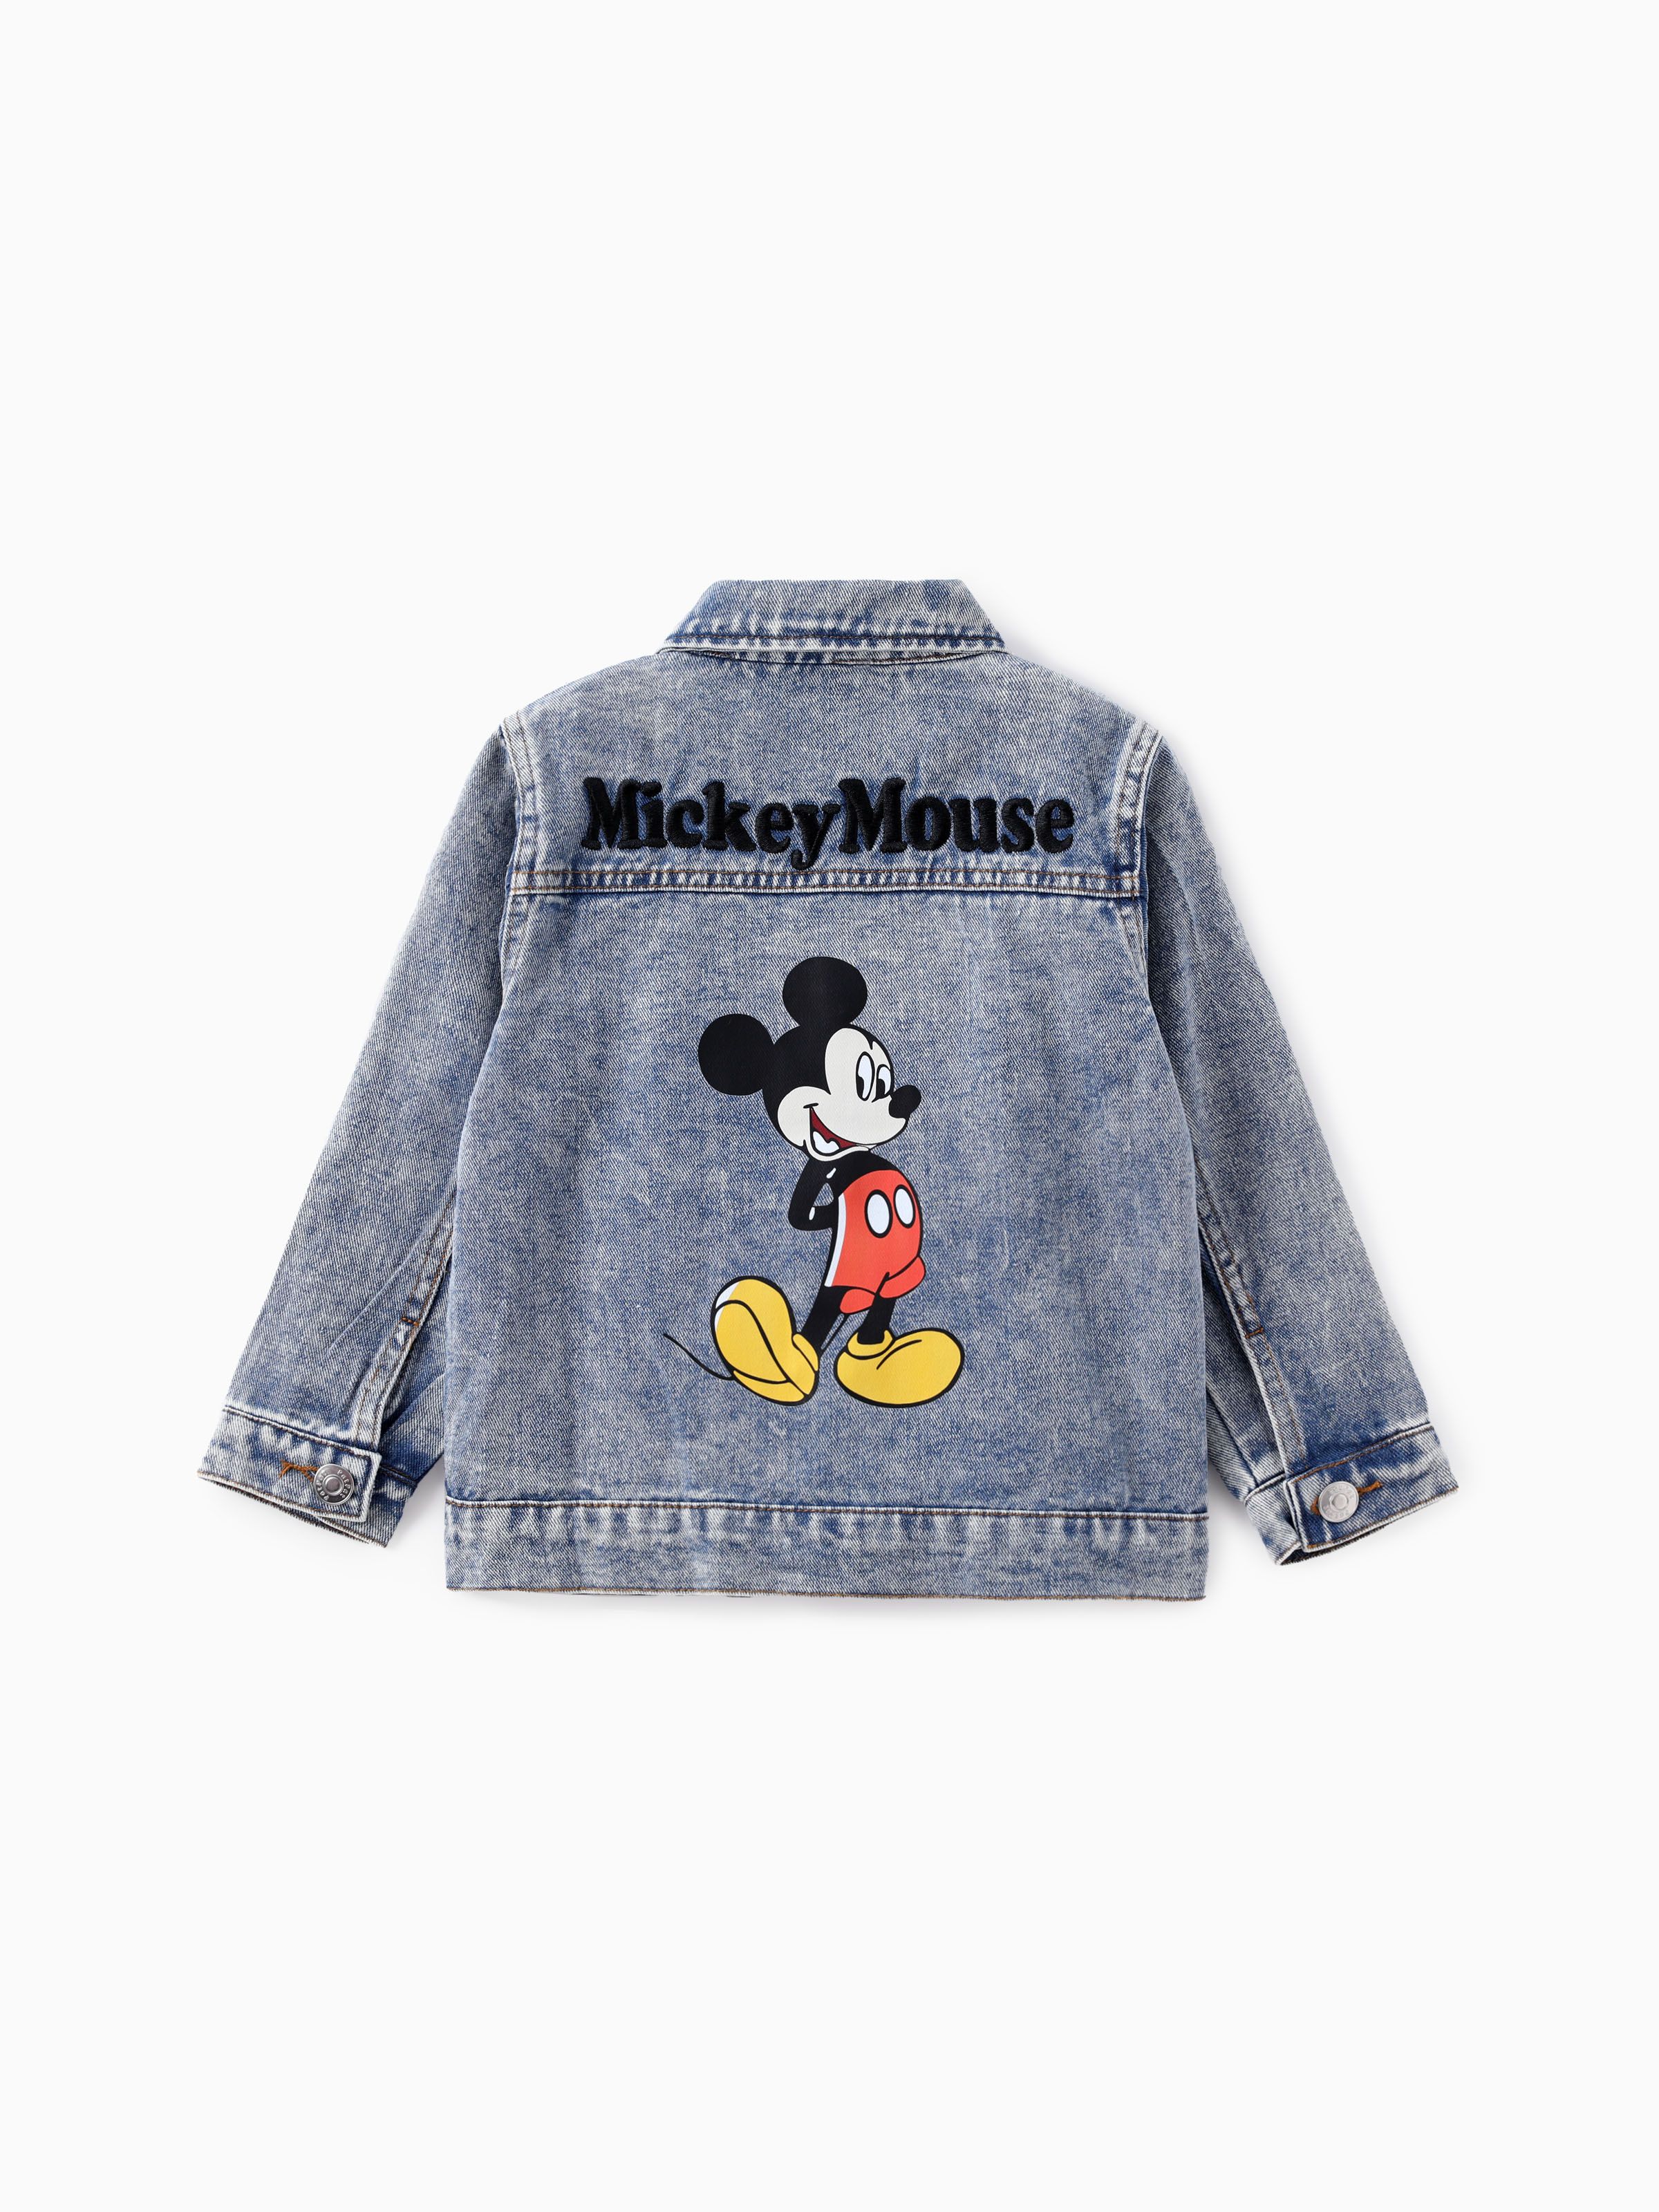 

Disney Mickey and Friends Toddler Girl/Boy 1pc Classic Denim Cotton Embroidered Letter Jacket